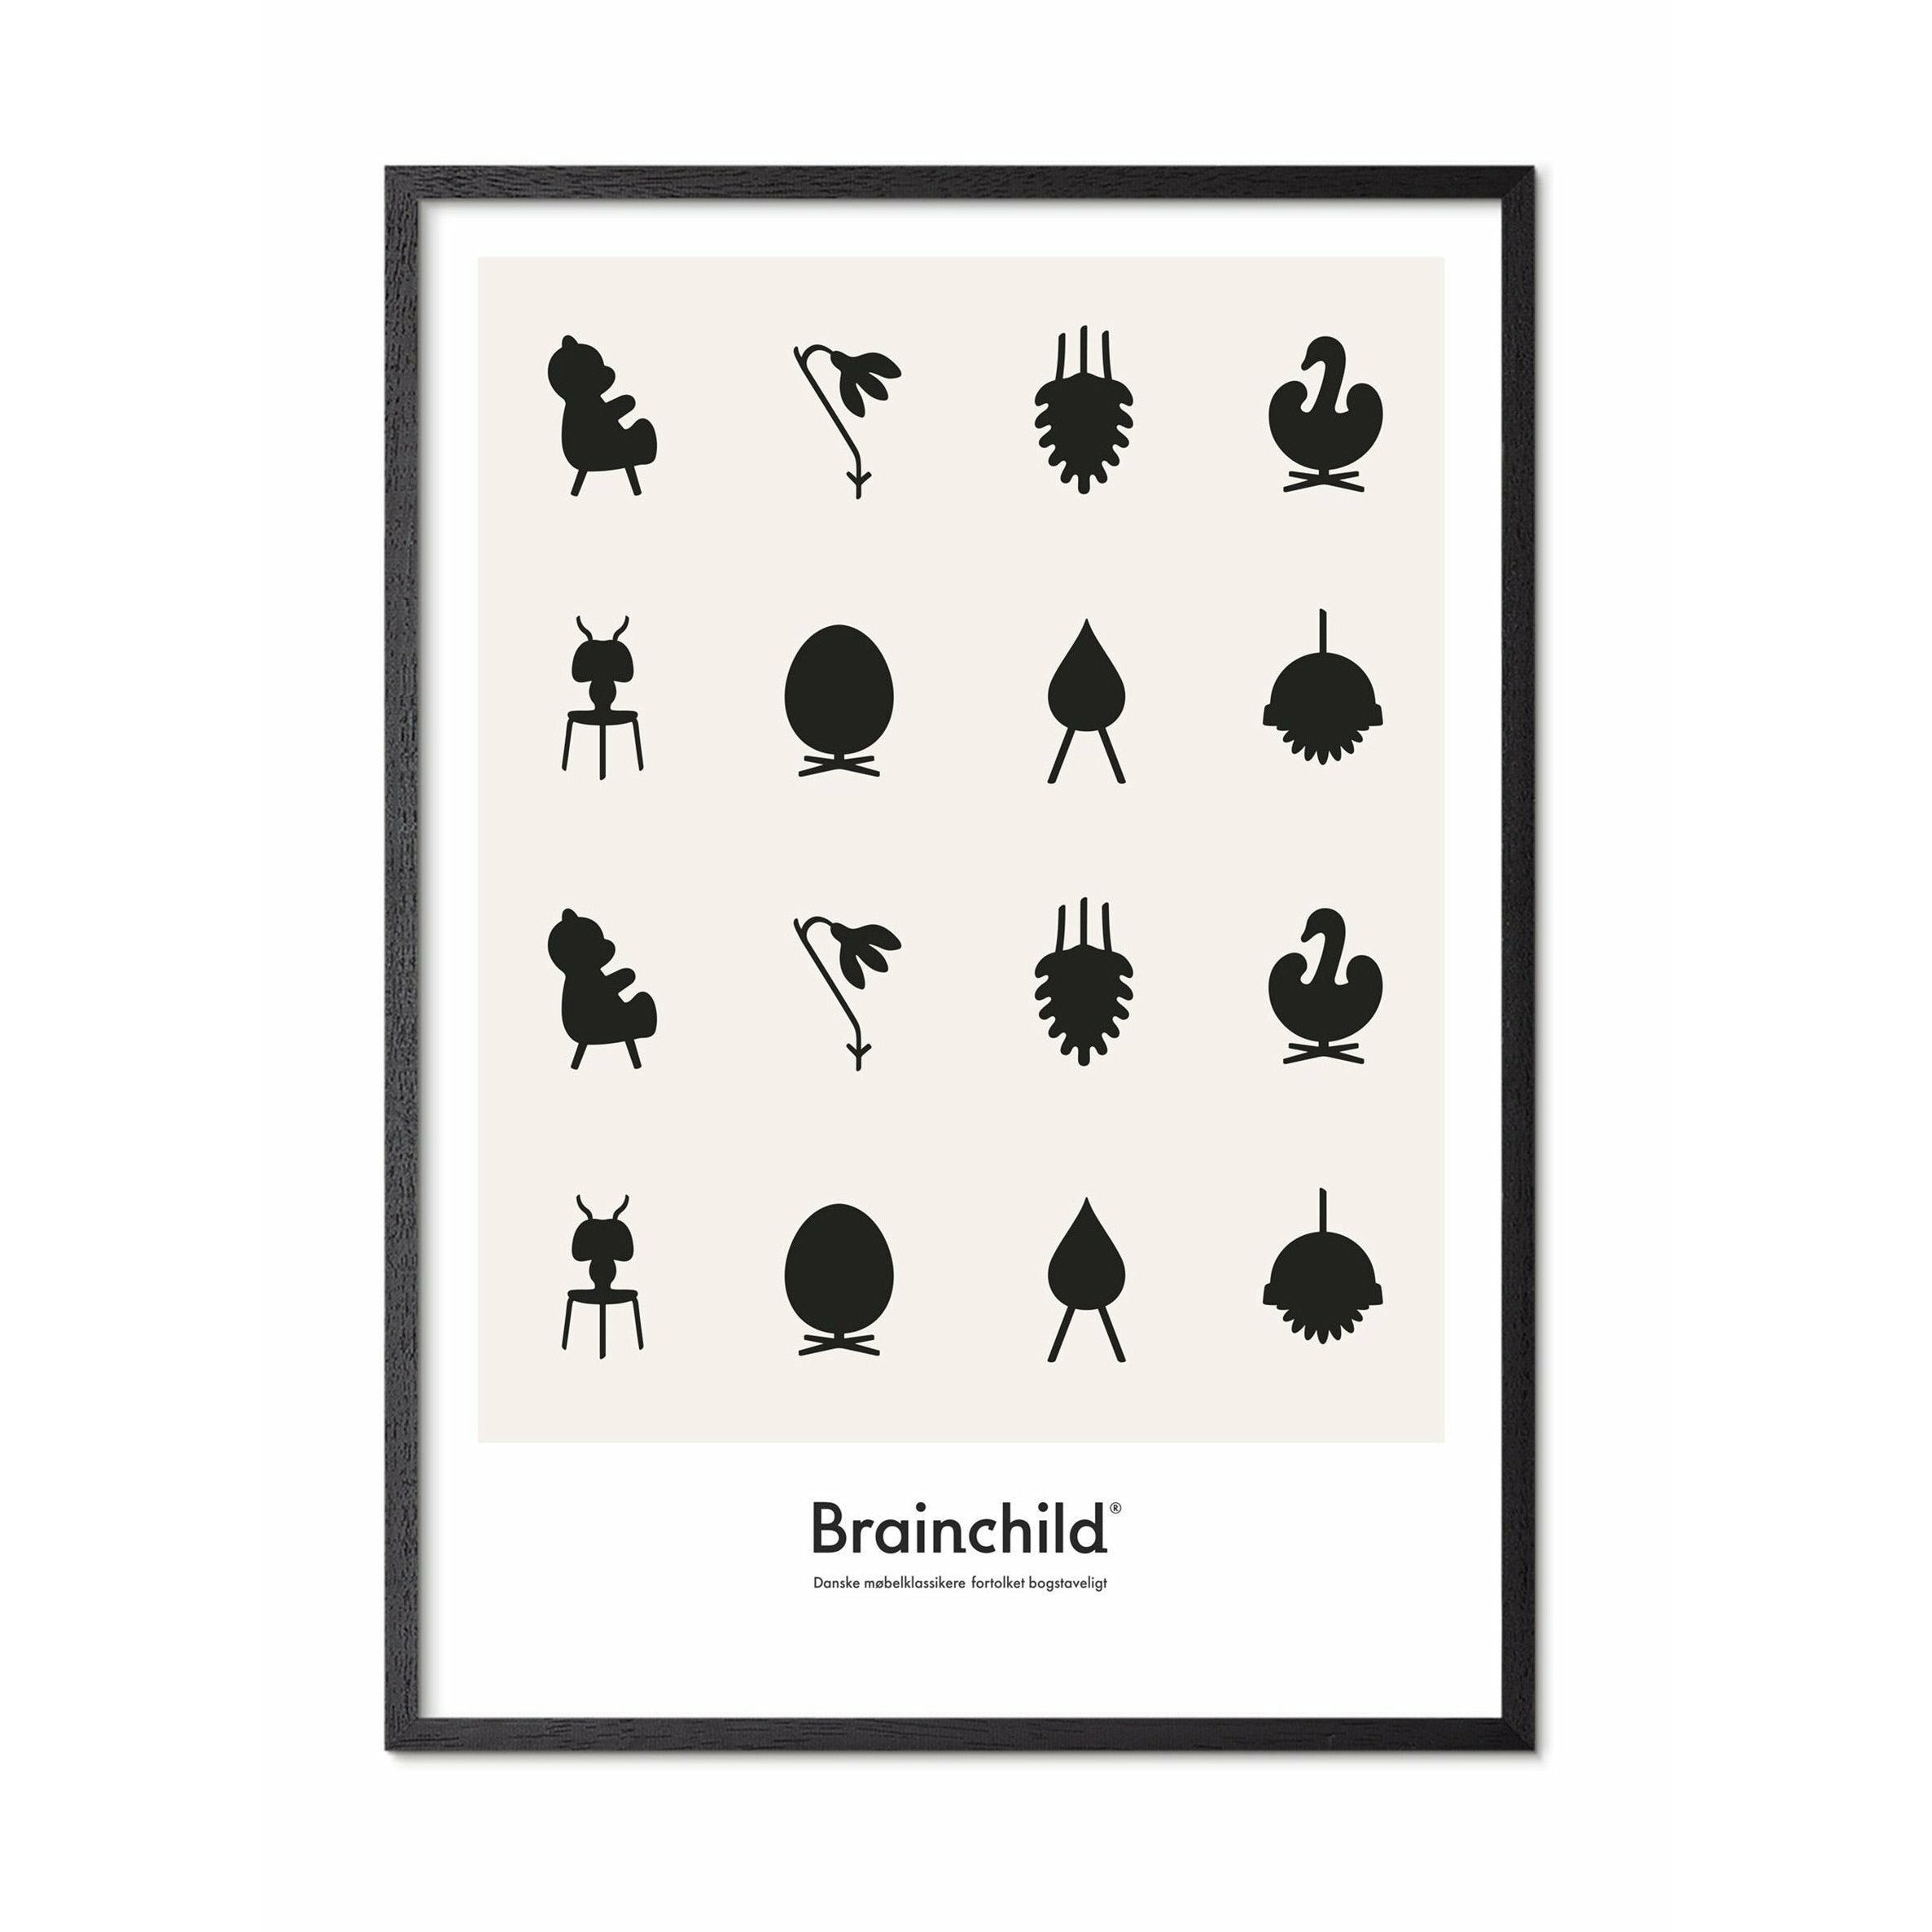 Brainchild Design Icon Poster, Frame In Black Lacquered Wood A5, Grey